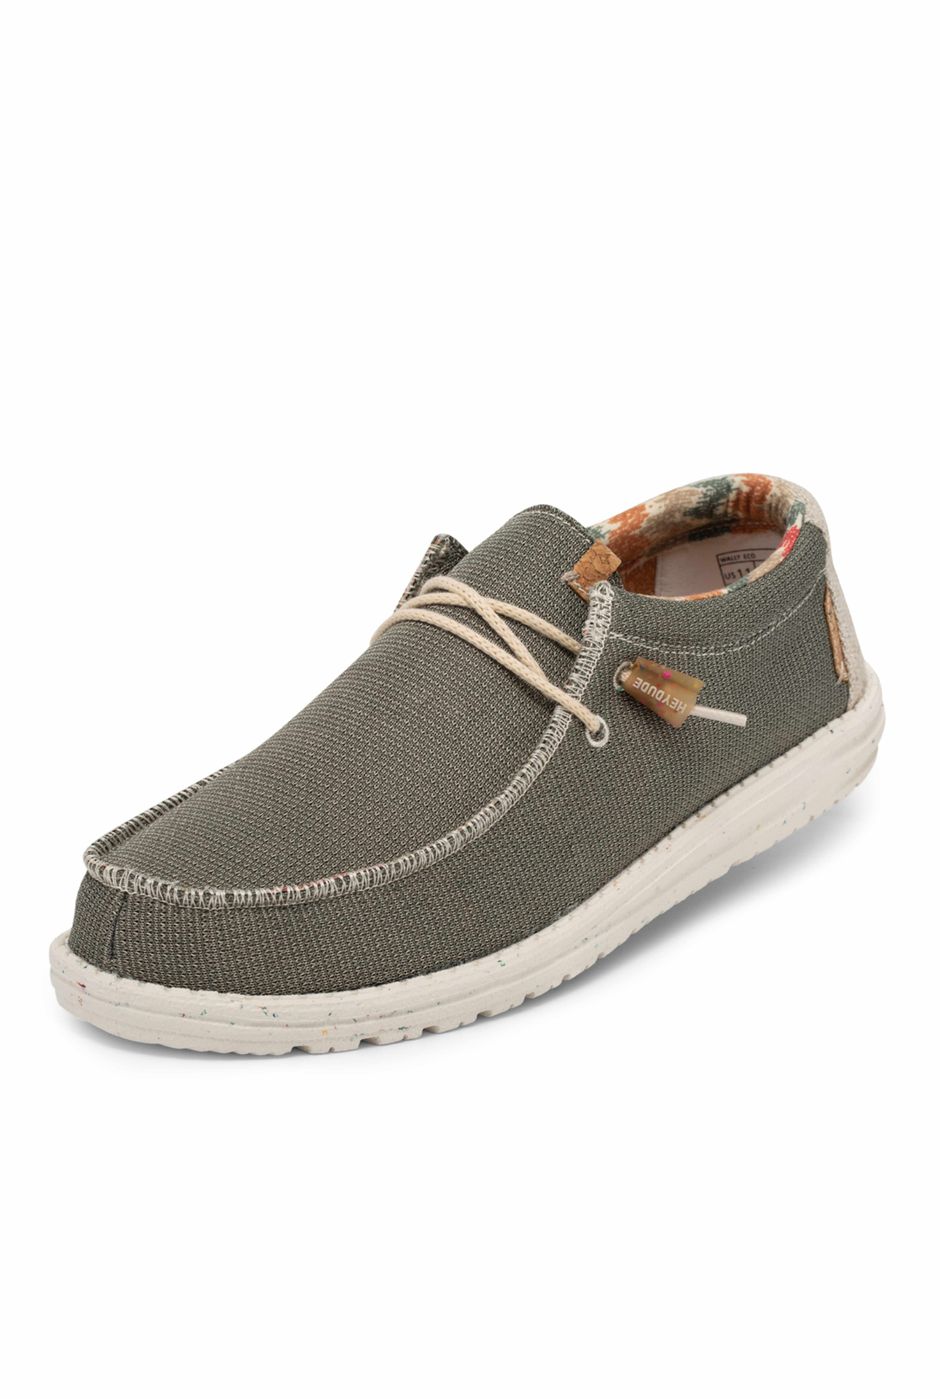 Hey Dude Wally Eco Sox Lightweight Shoes Olive